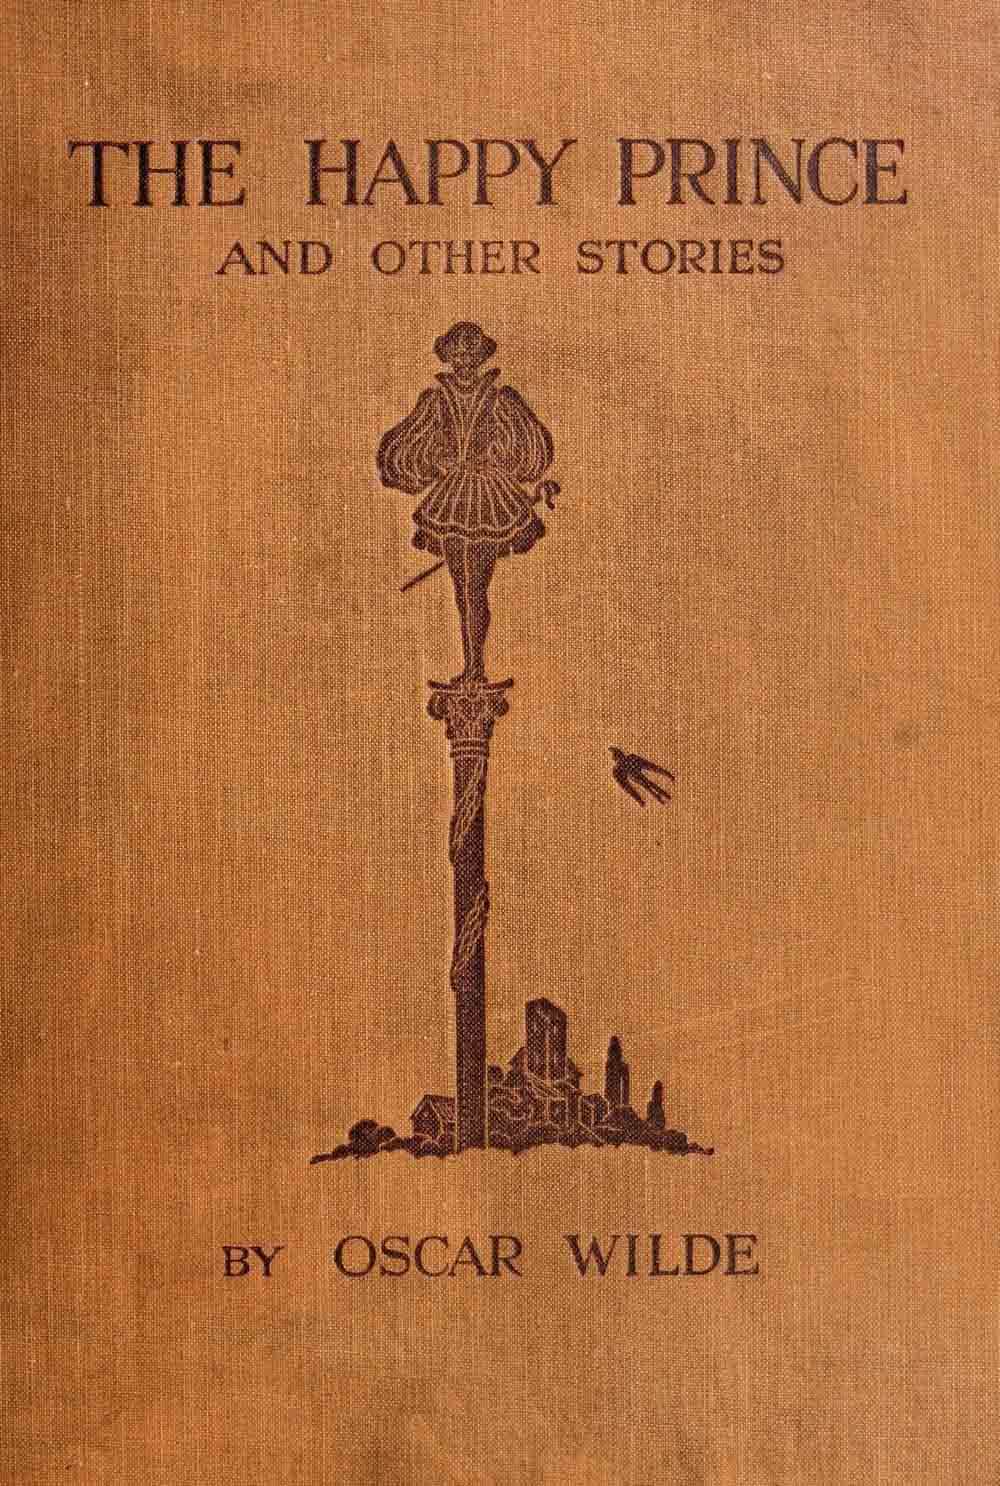 The Happy Prince and Other Tales Book Cover 1920 Oscar Wilde